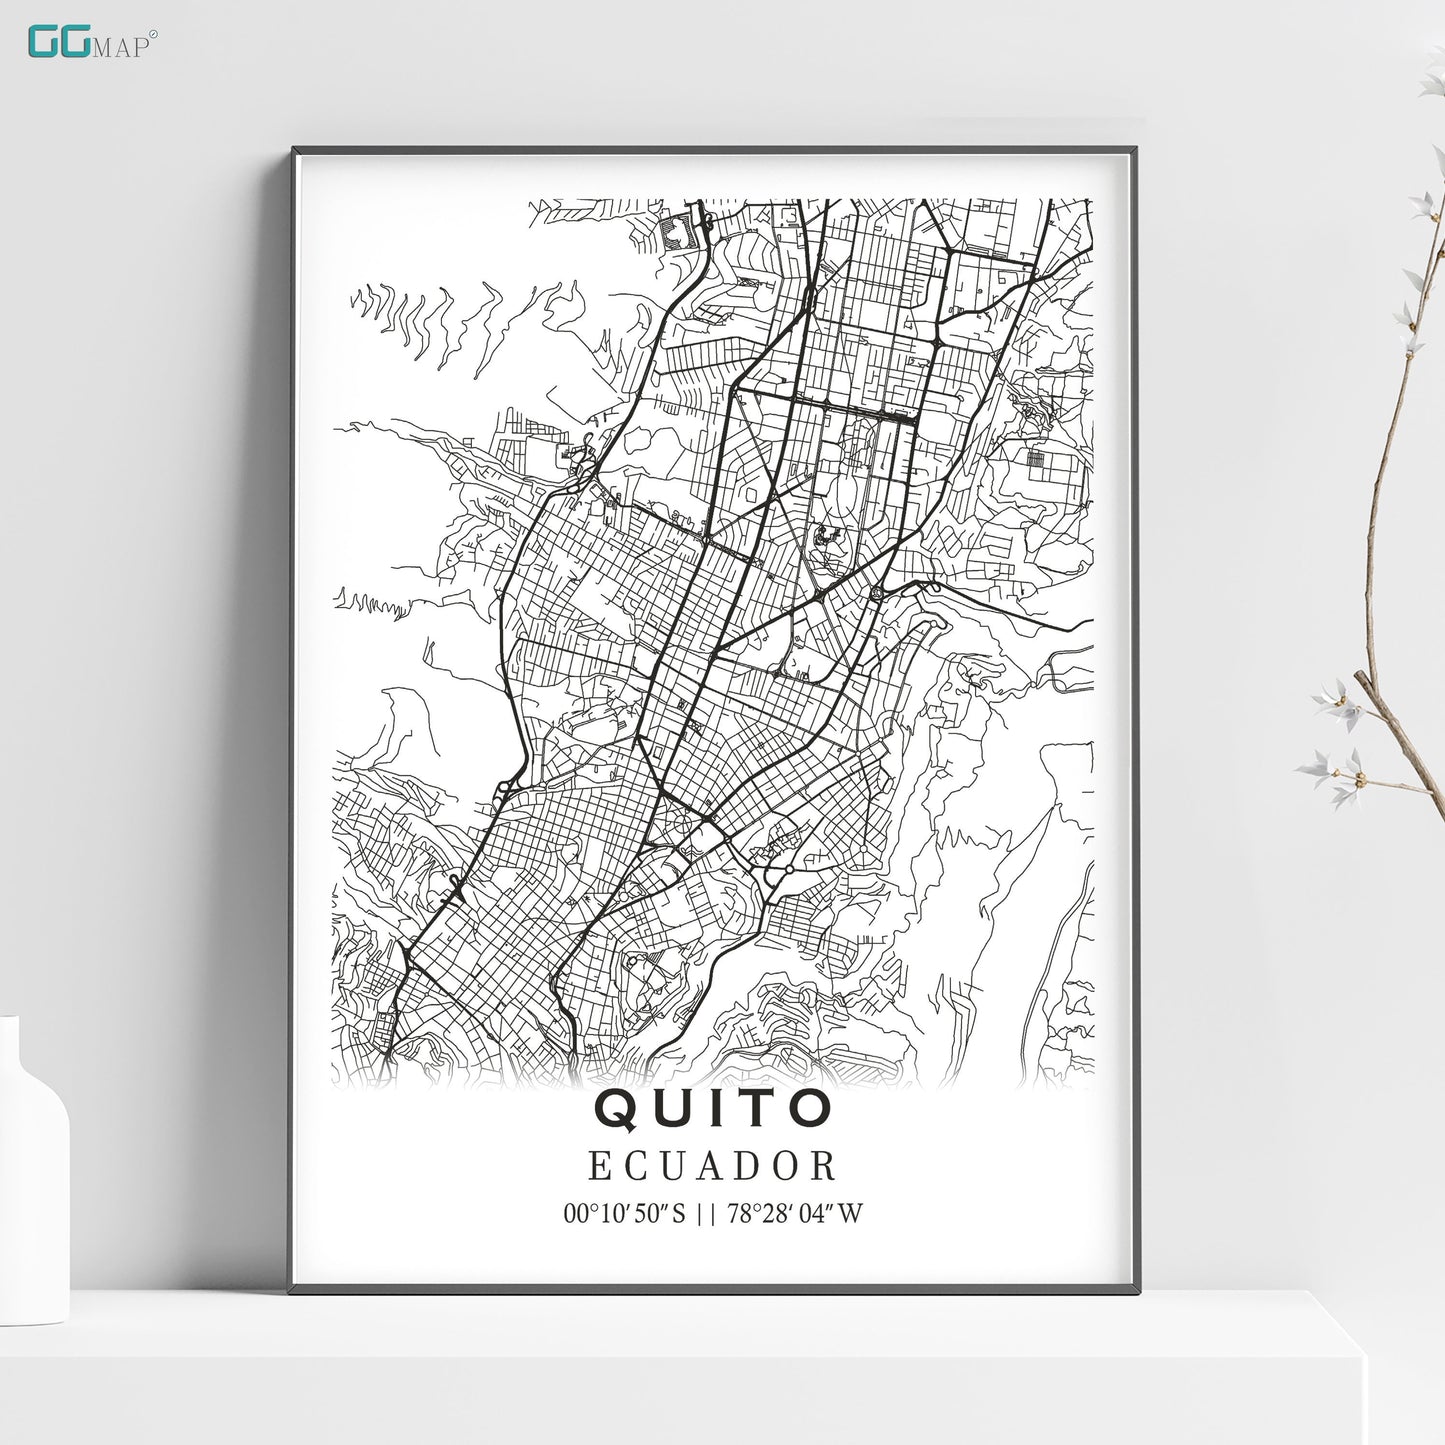 a black and white map of the city of quito